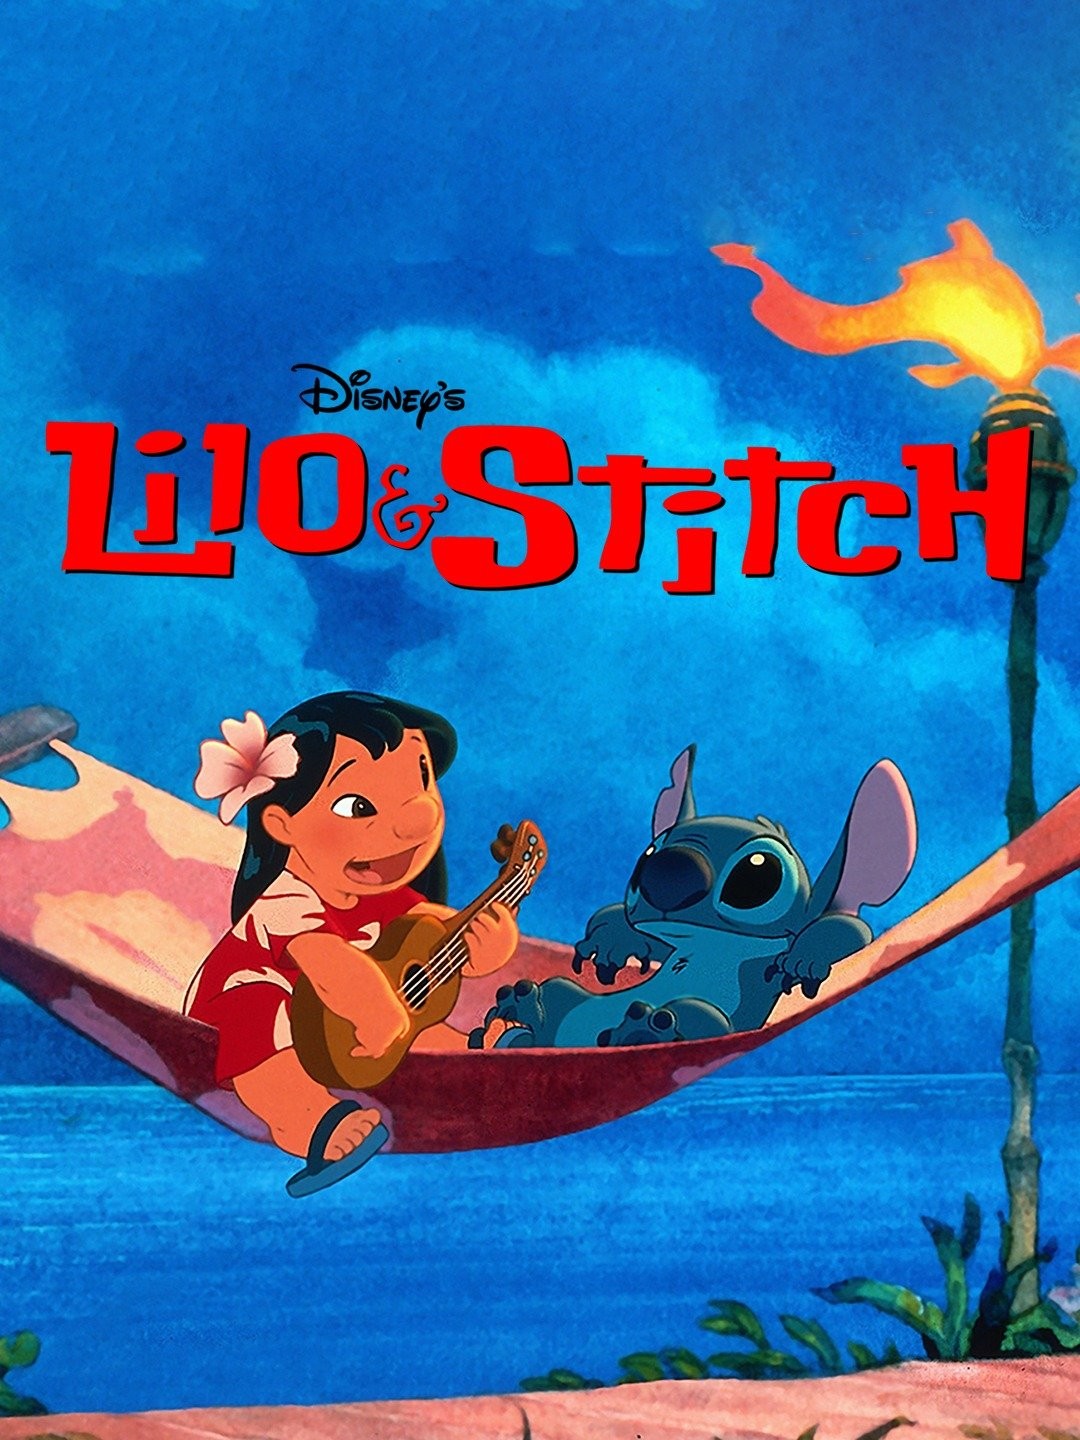 Lilo & Stitch: The Series Angel: Experiment 624 (TV Episode 2004